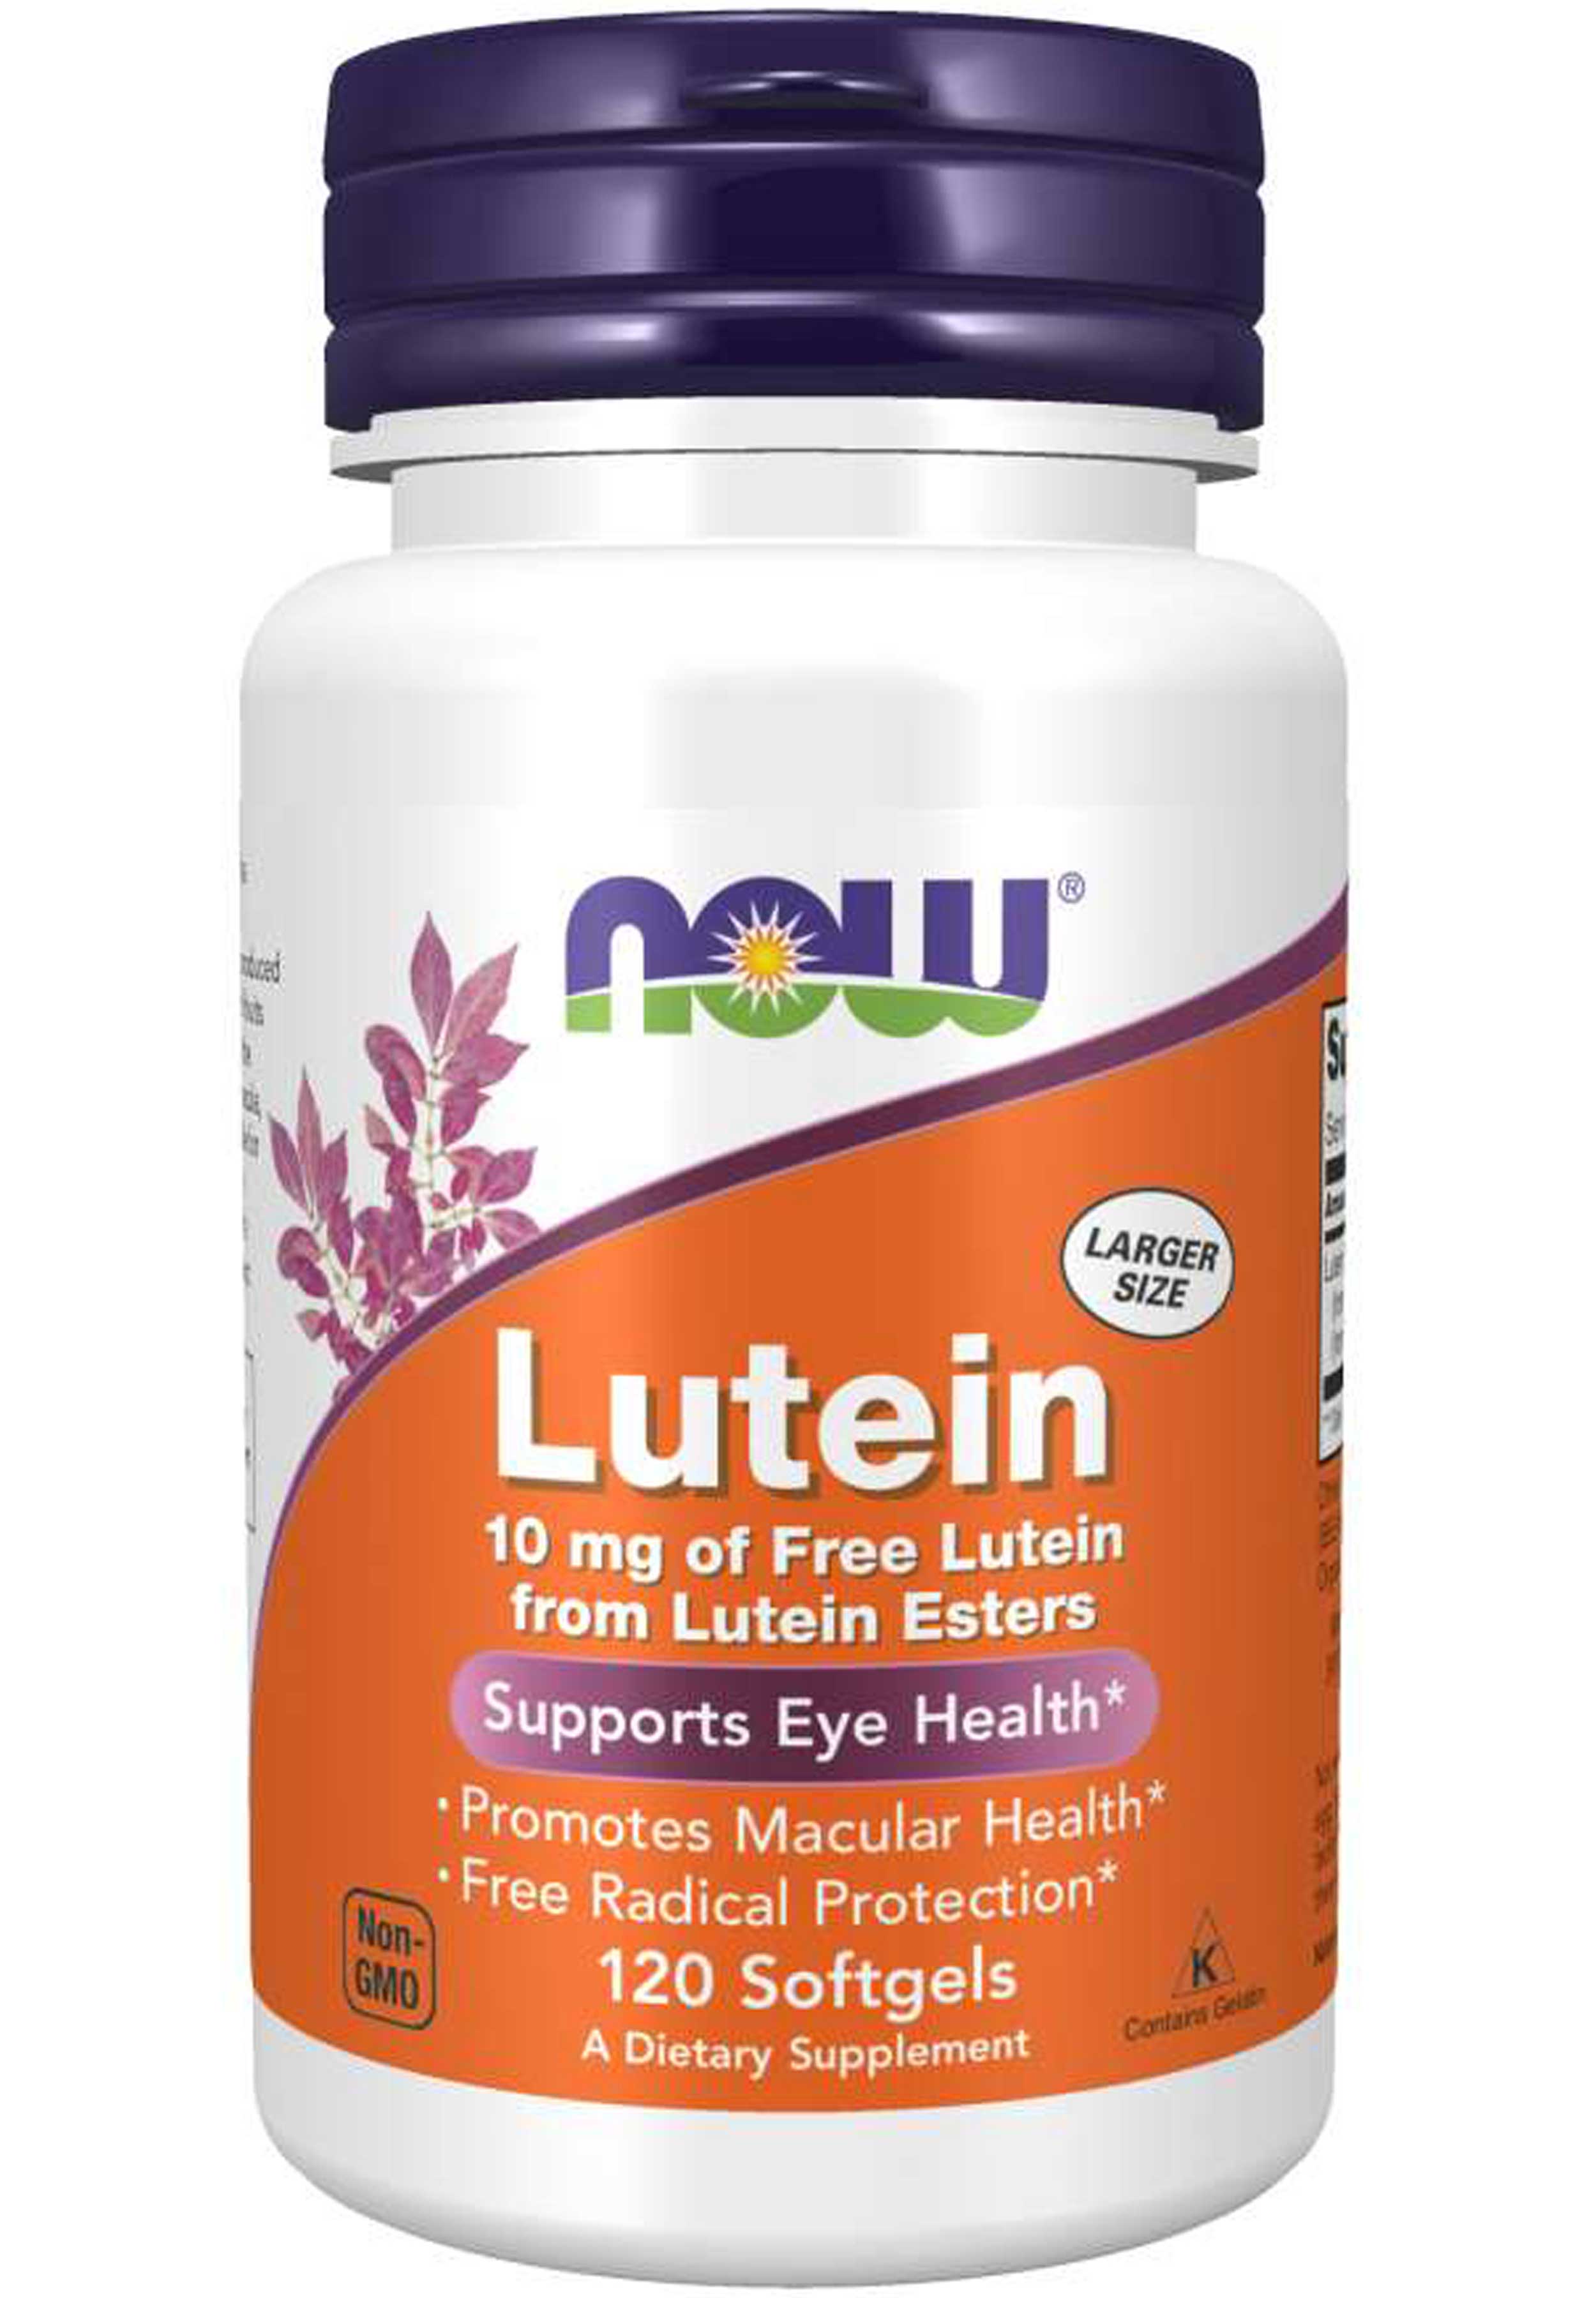 NOW Lutein 10 mg